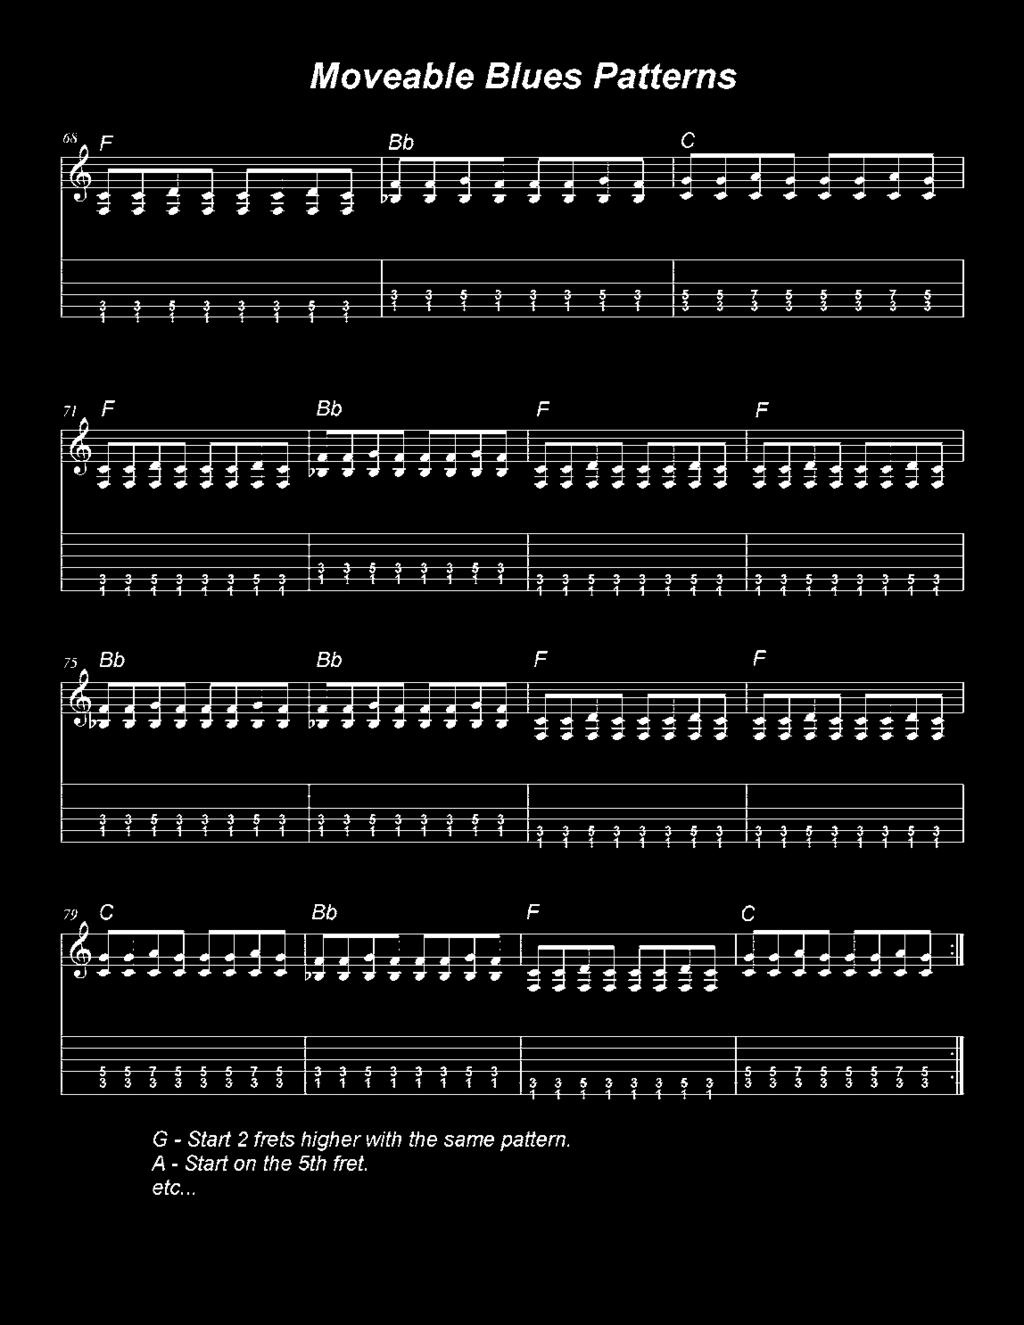 Movable Blues Pattern: This pattern is called the 1,4,5 progression and can be moved up and down the fretboard by simply starting on a different